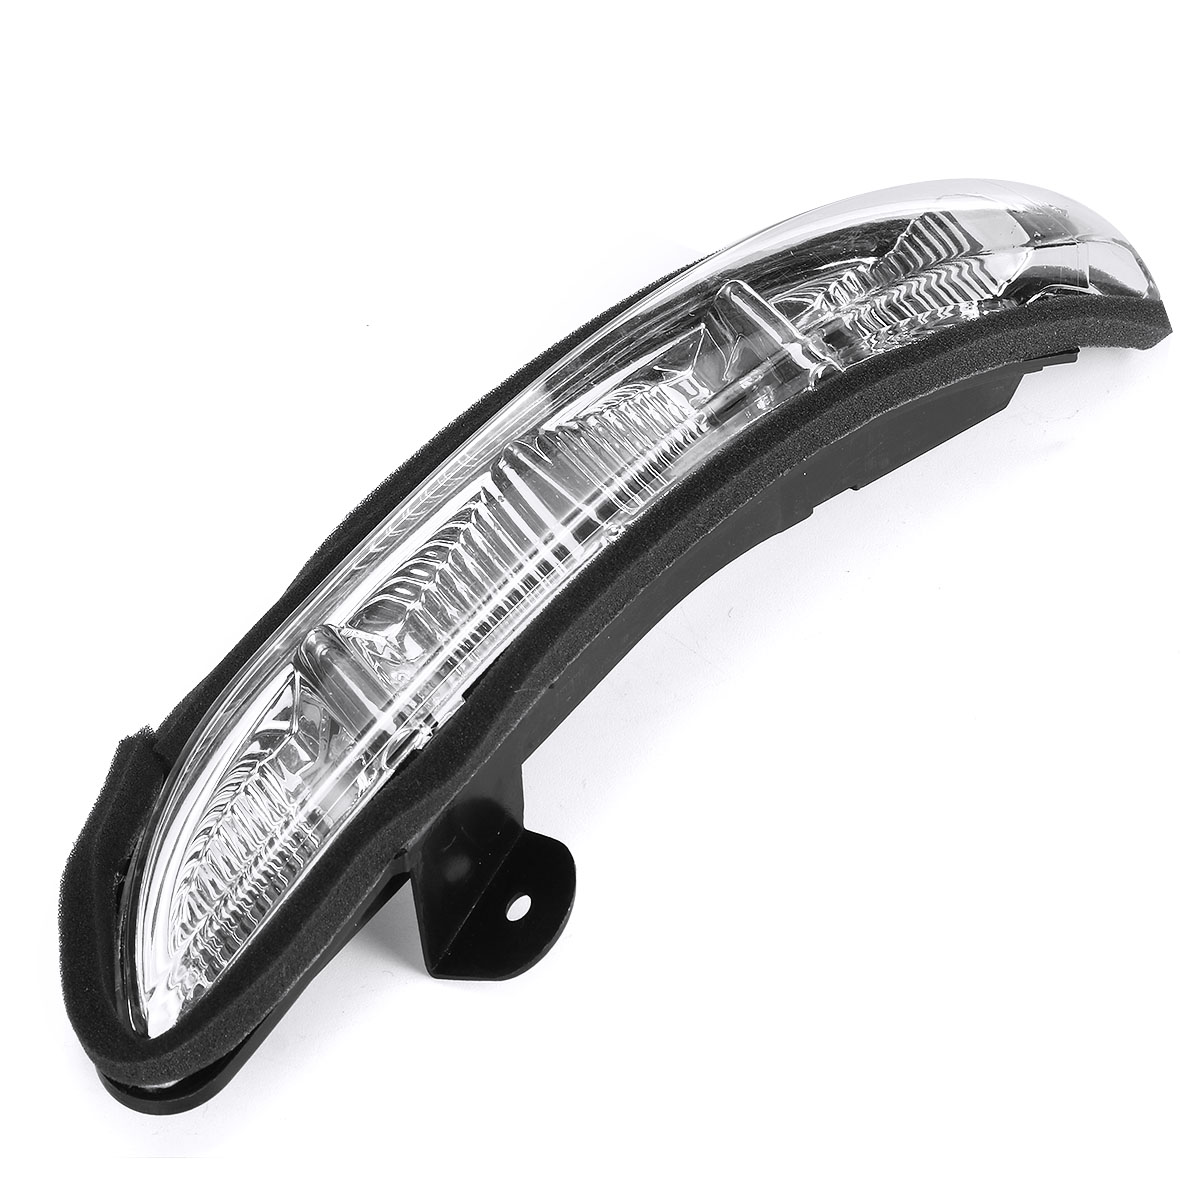 Car Wing Mirror Lamp Turn Indicator Side Lights Left for Mercedes Benz Cl/Cls/S/E-Class W219 W211 W216 W221